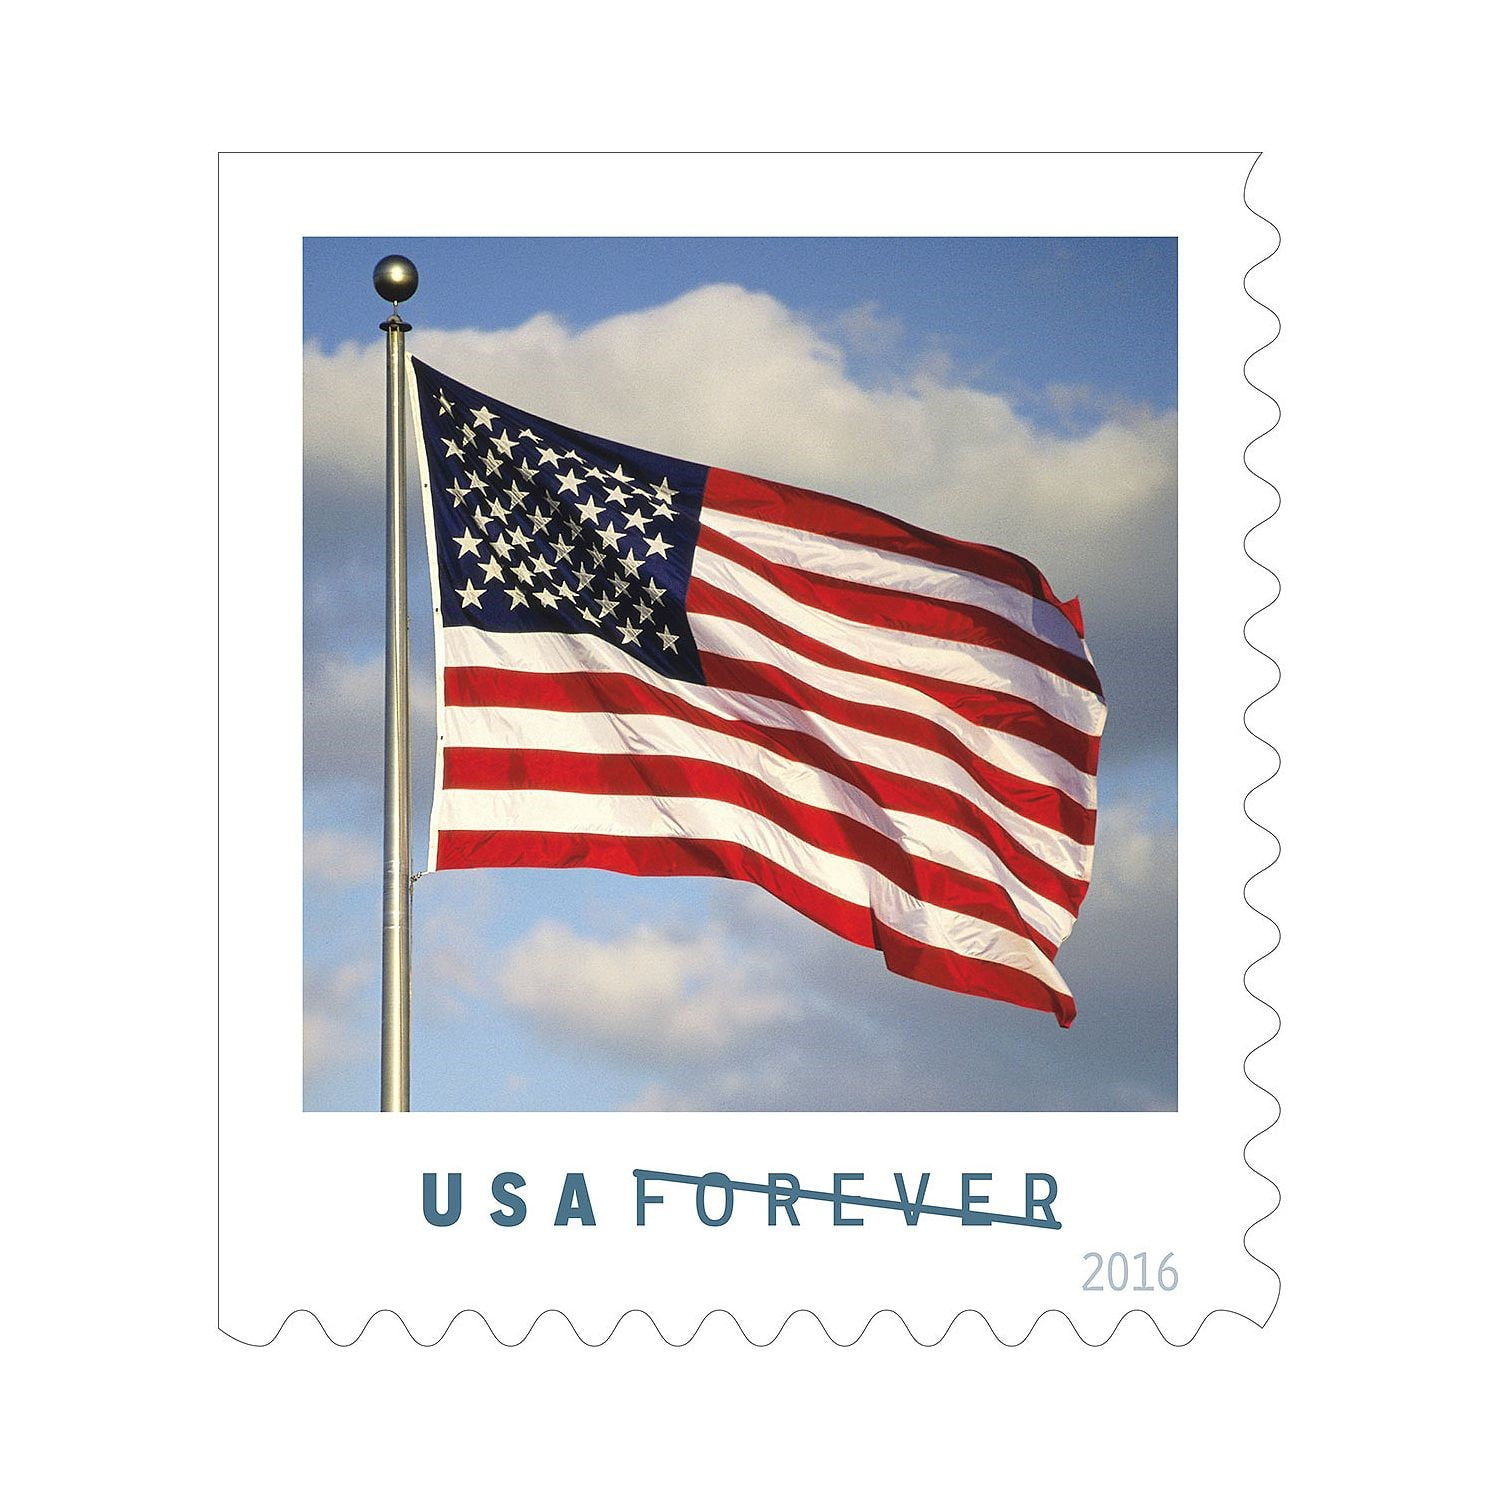 USPS FOREVER First Class Postage Stamps, U.S. Flag, Coil of 100 Stamps